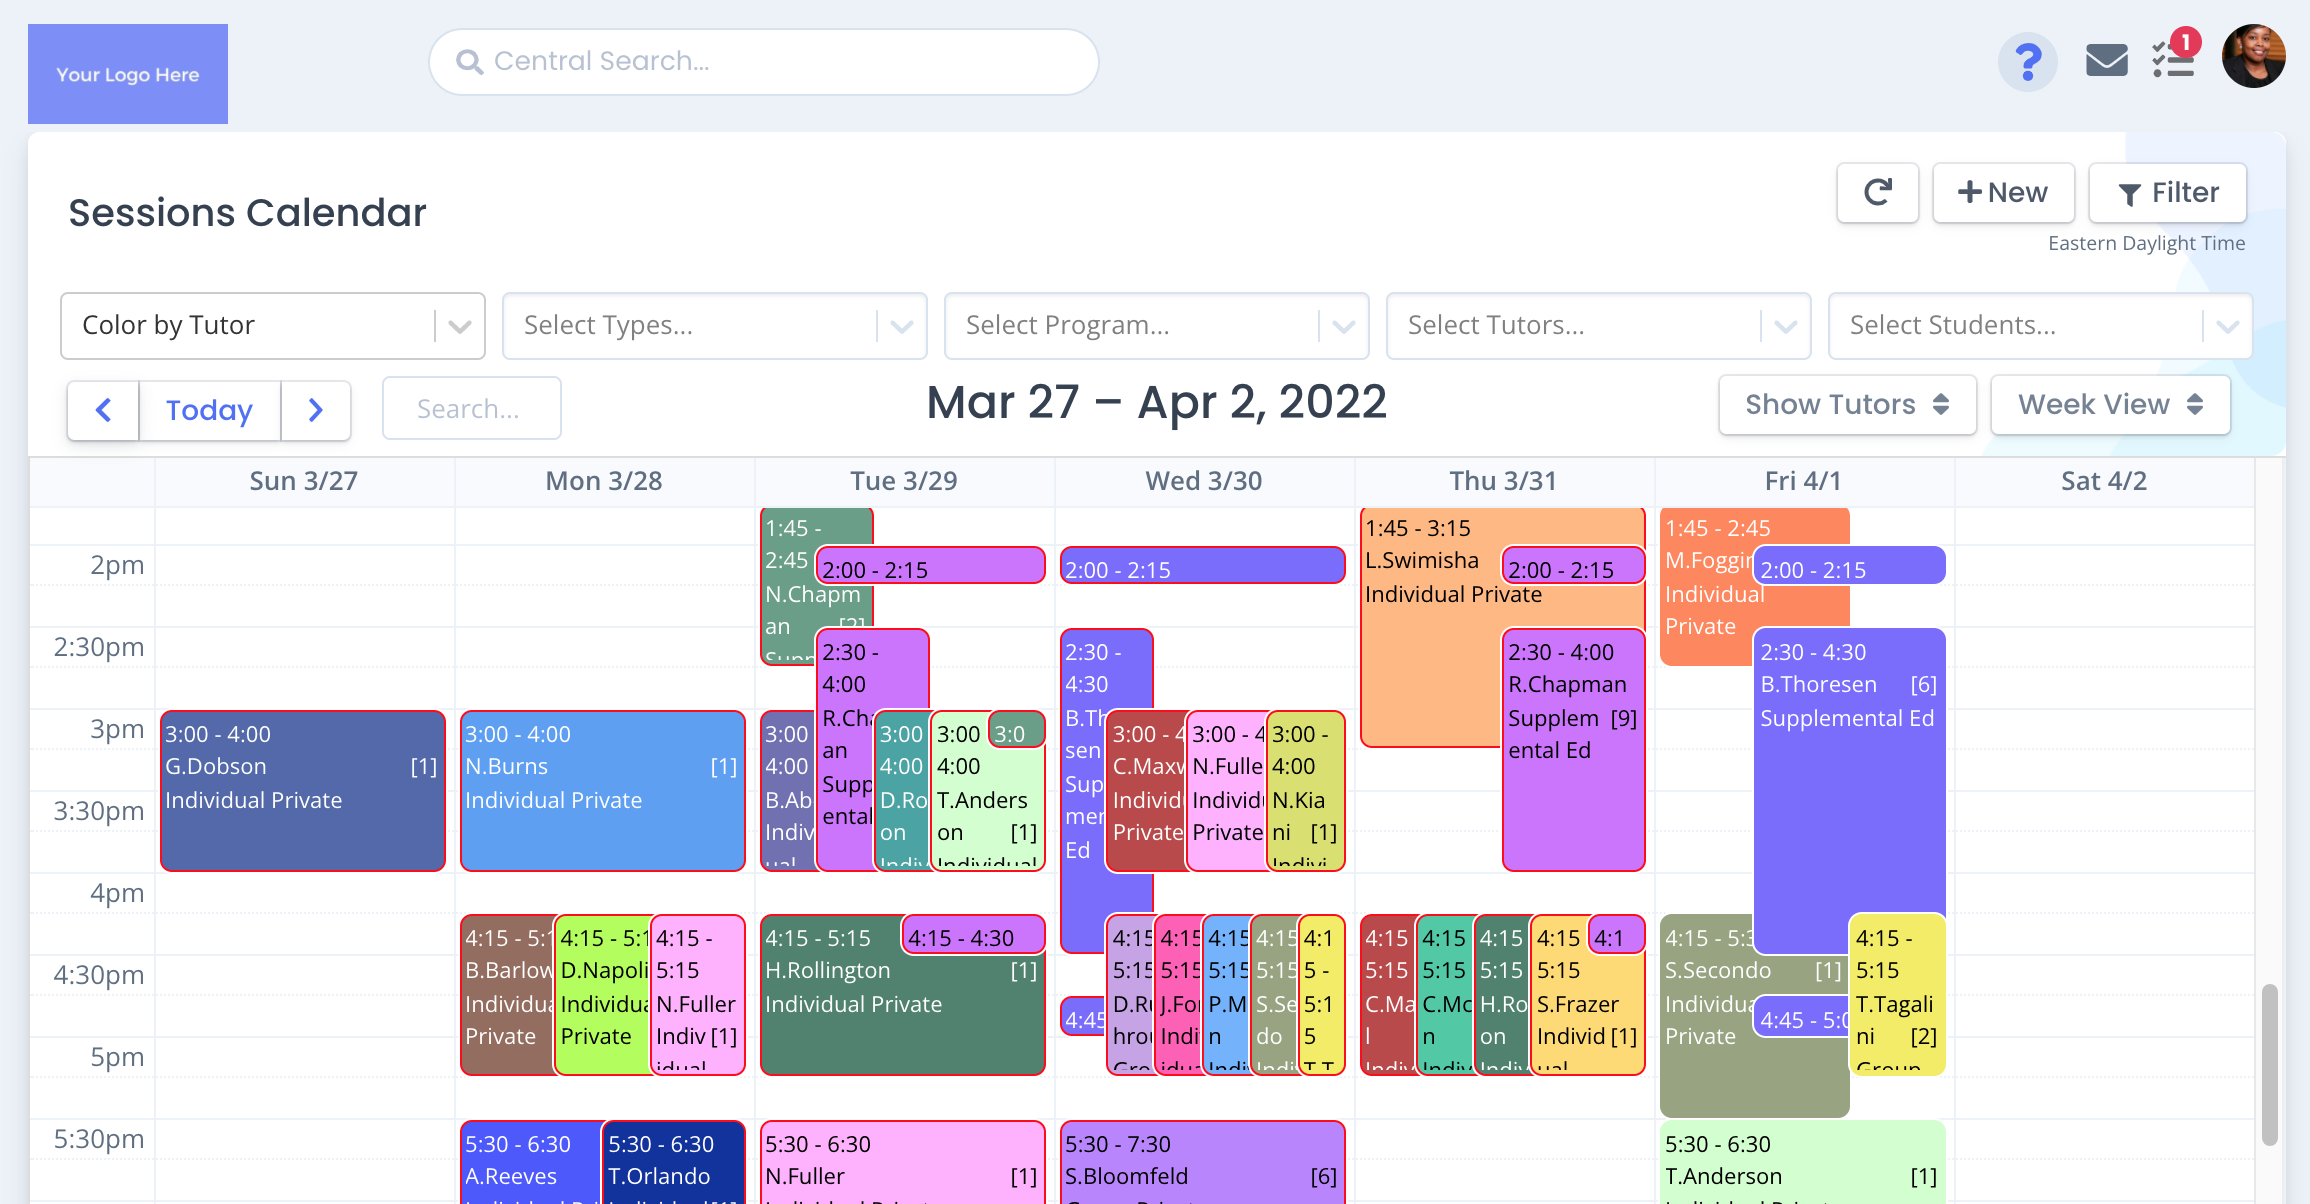 Oases Online Software - Calendar Week View. Unfiltered. Colored by Tutor. Options to color by status, location & custom.